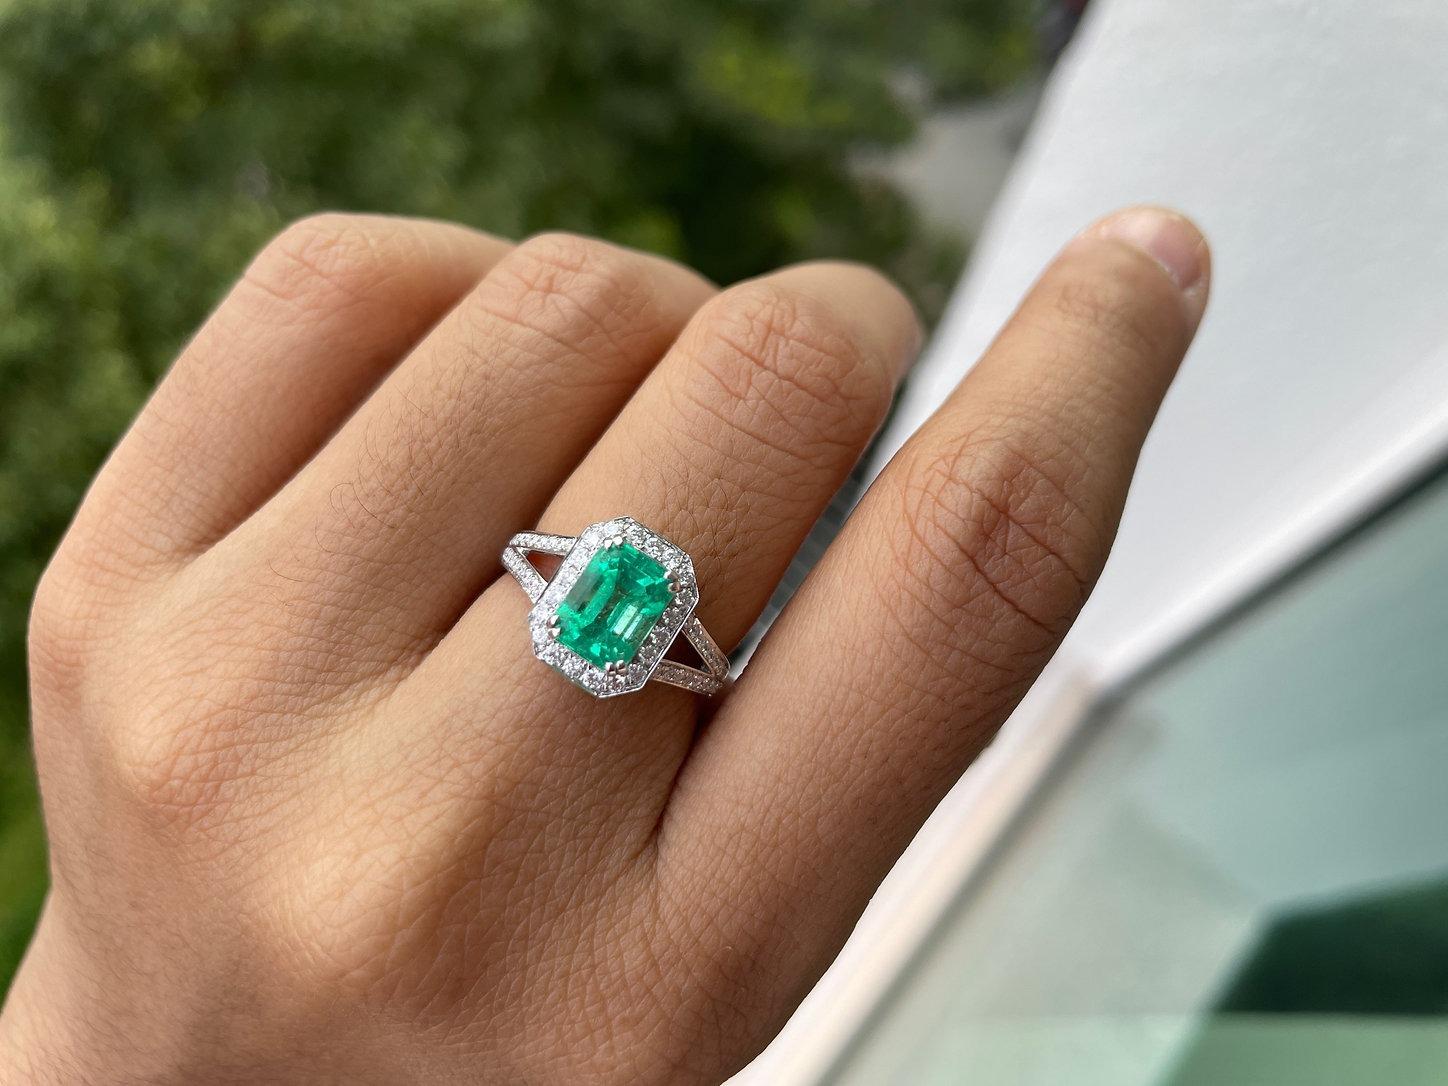 Colombian Emerald Halo Ring in 18k gold with GIA Certificate

Features :

Main Gemstone - Colombian Emerald

Total Carat Weight (1pc) - 1.65Ct

Measurement of gemstone - 7.75x5.84x5.33 mm

Color - Green

Cut - Emerald Cut

Clarity -